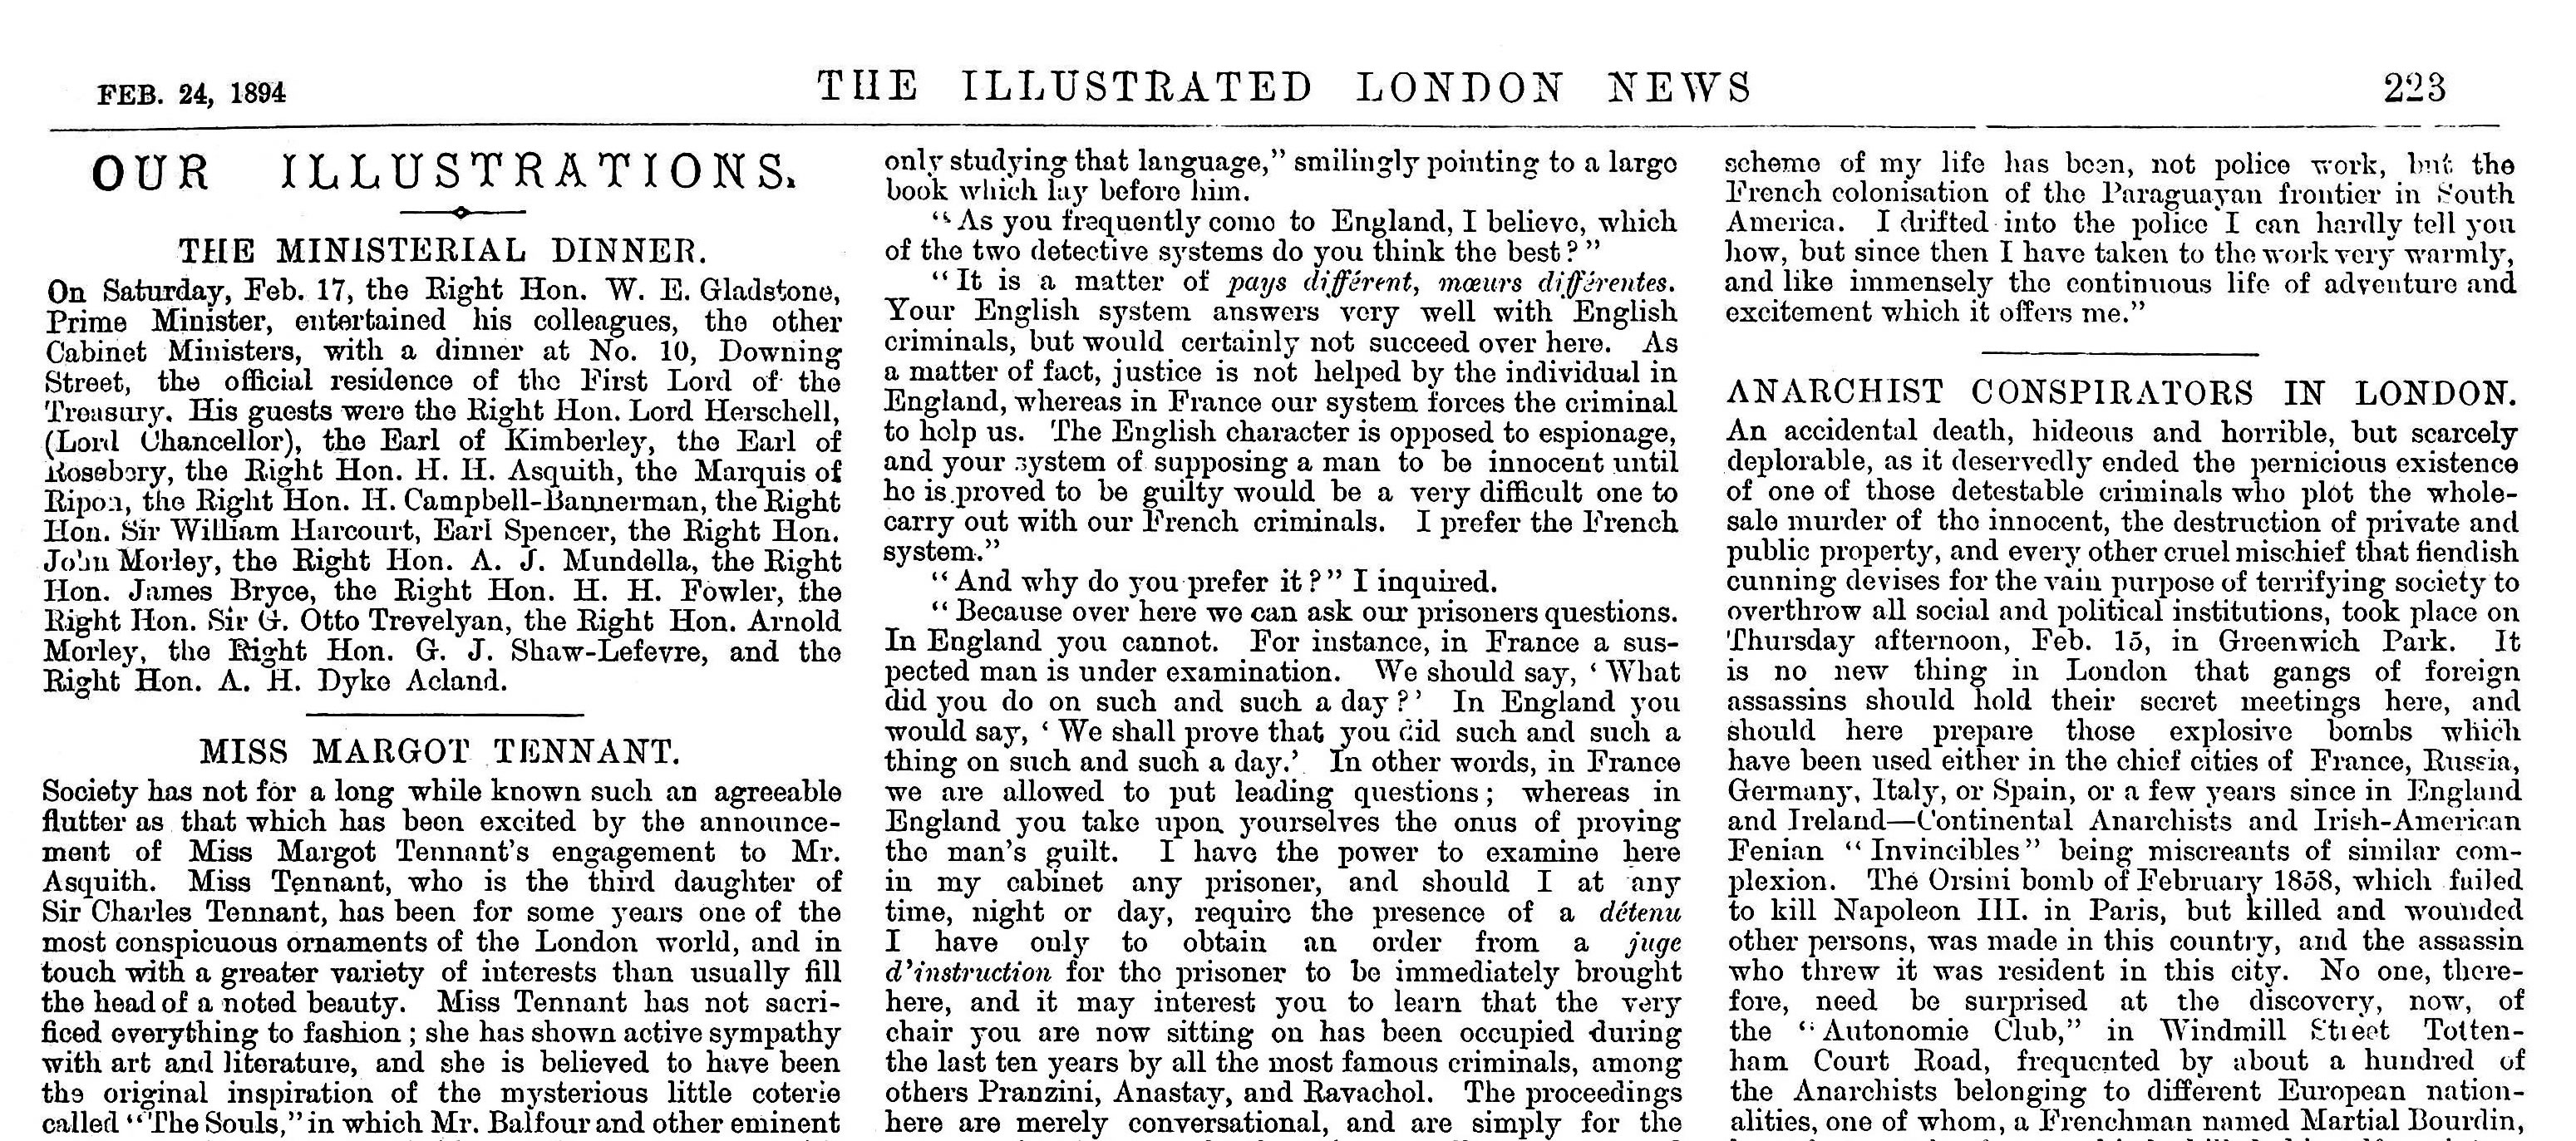 Anarchist Conspirators in London - The Illustrated London News, Feb 24 1894